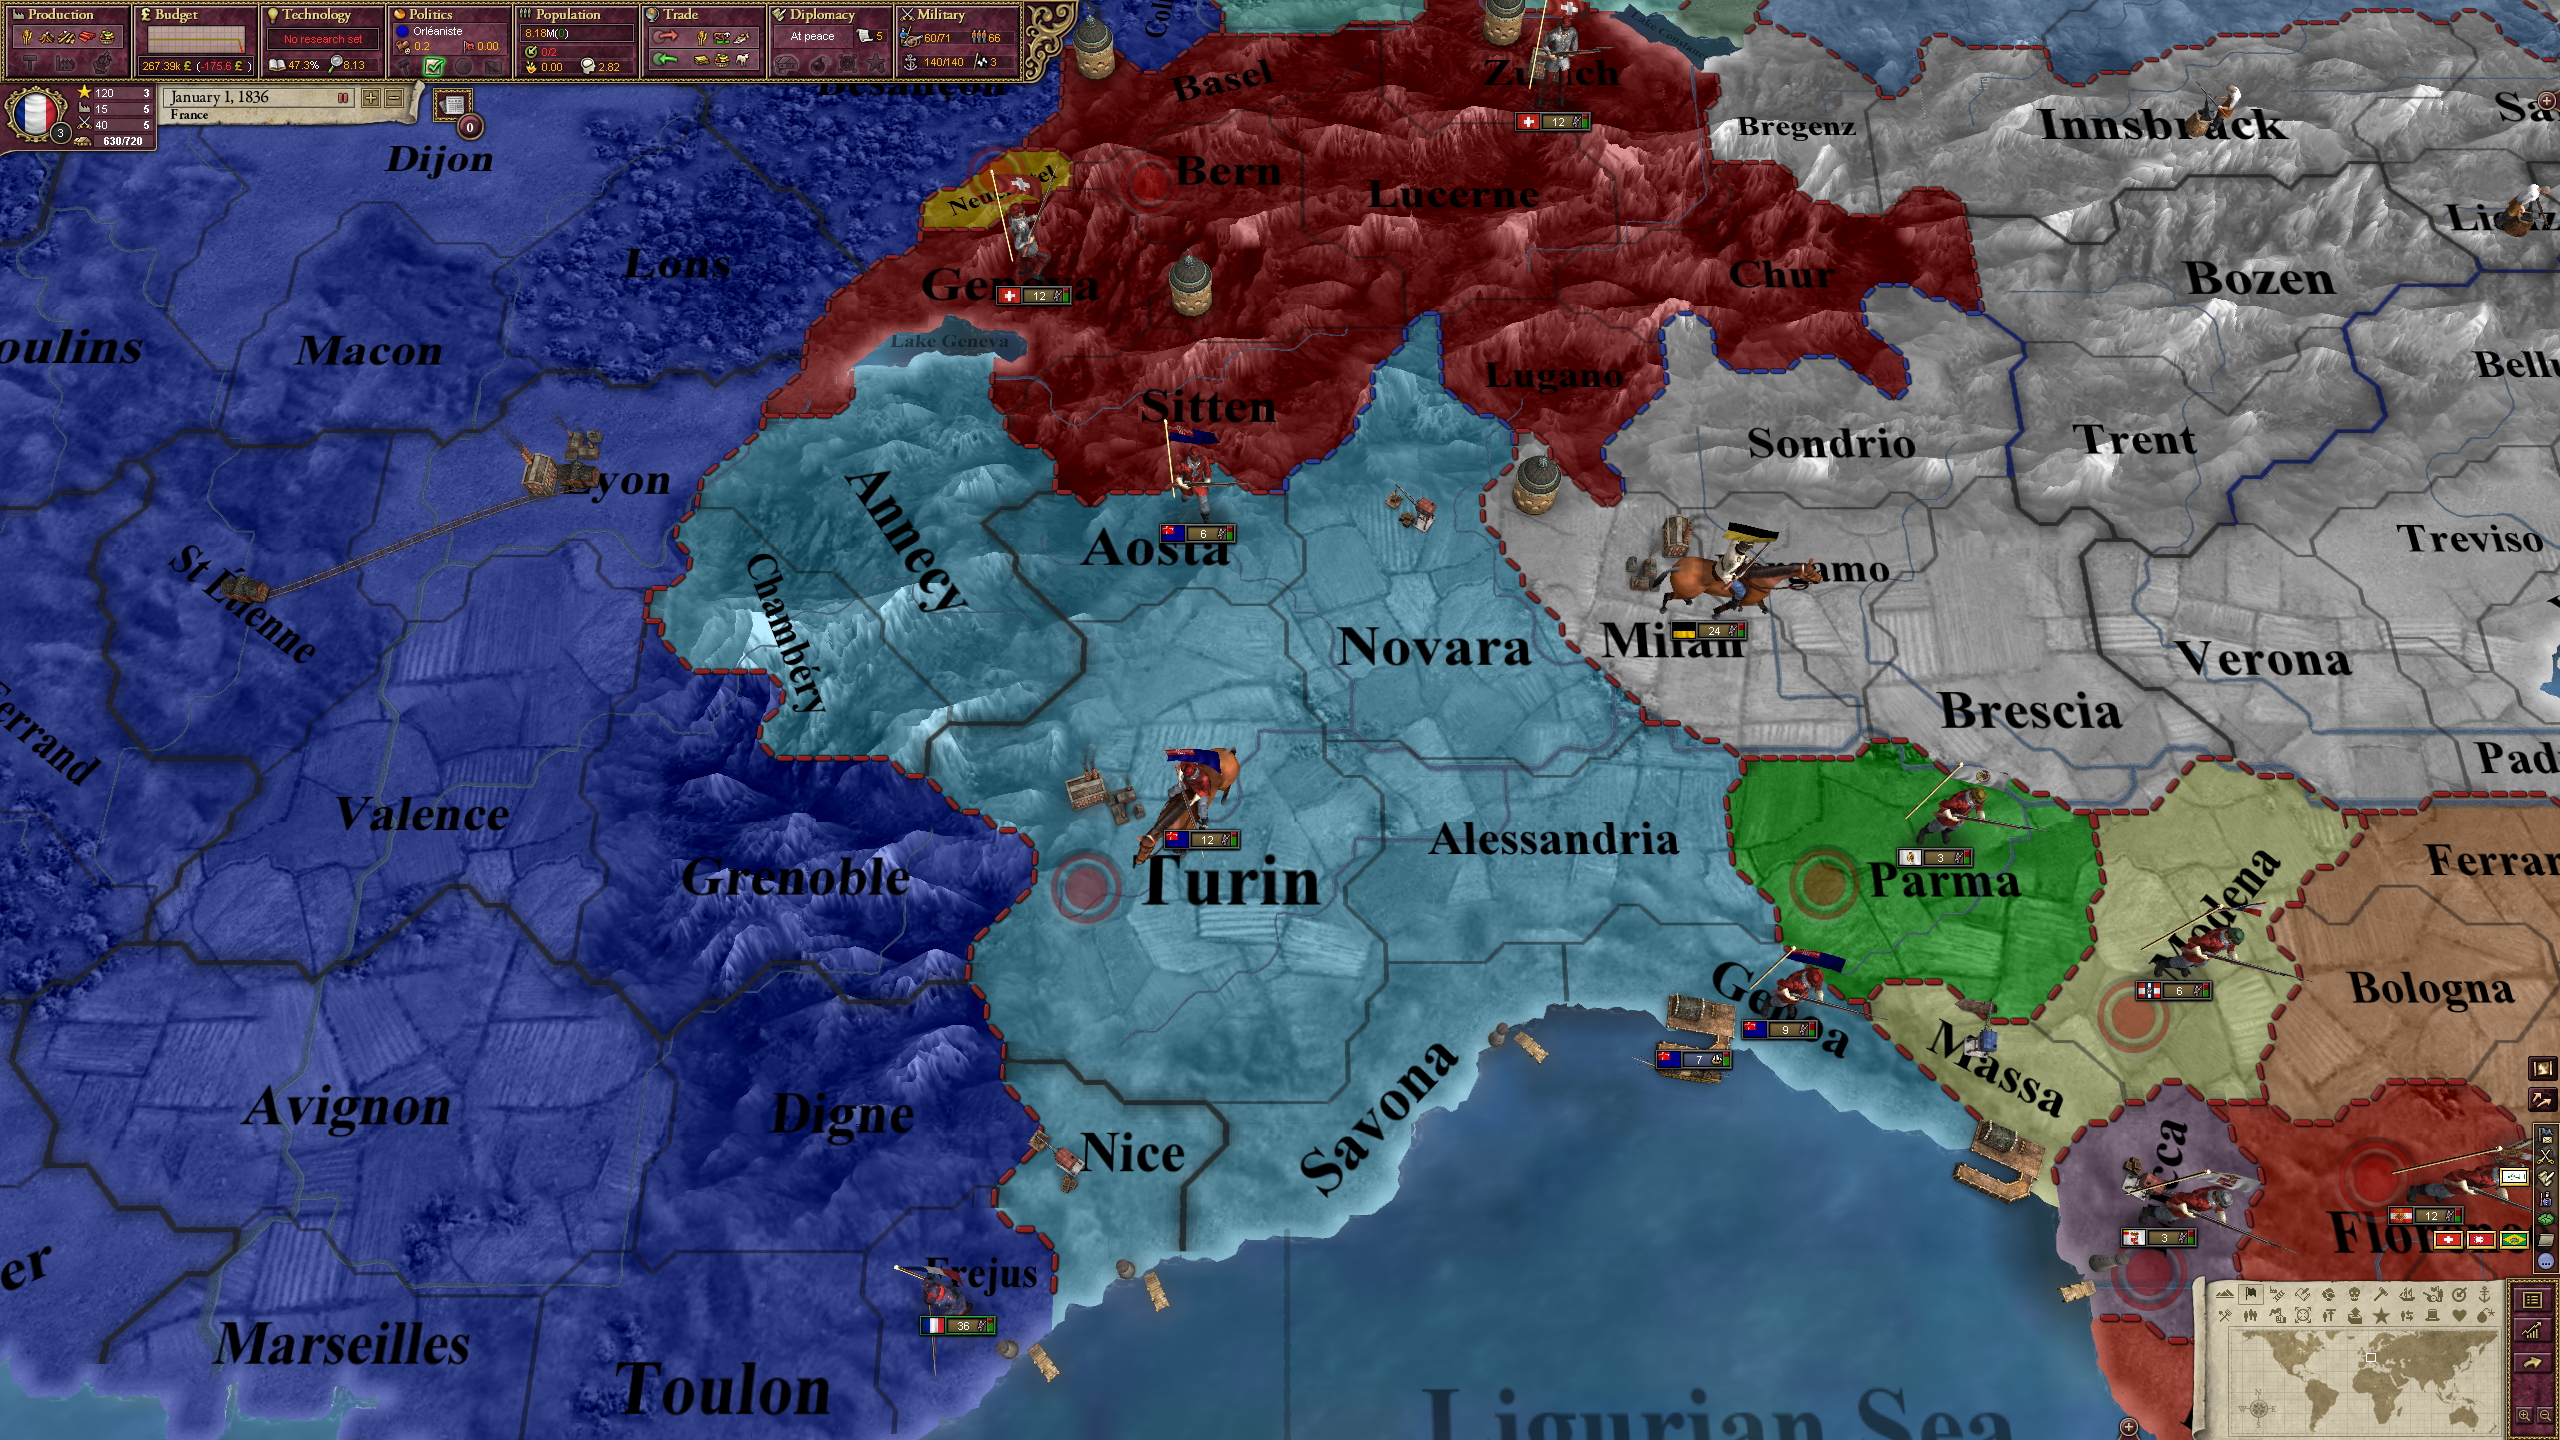 Shader fun in Hearts of Iron IV